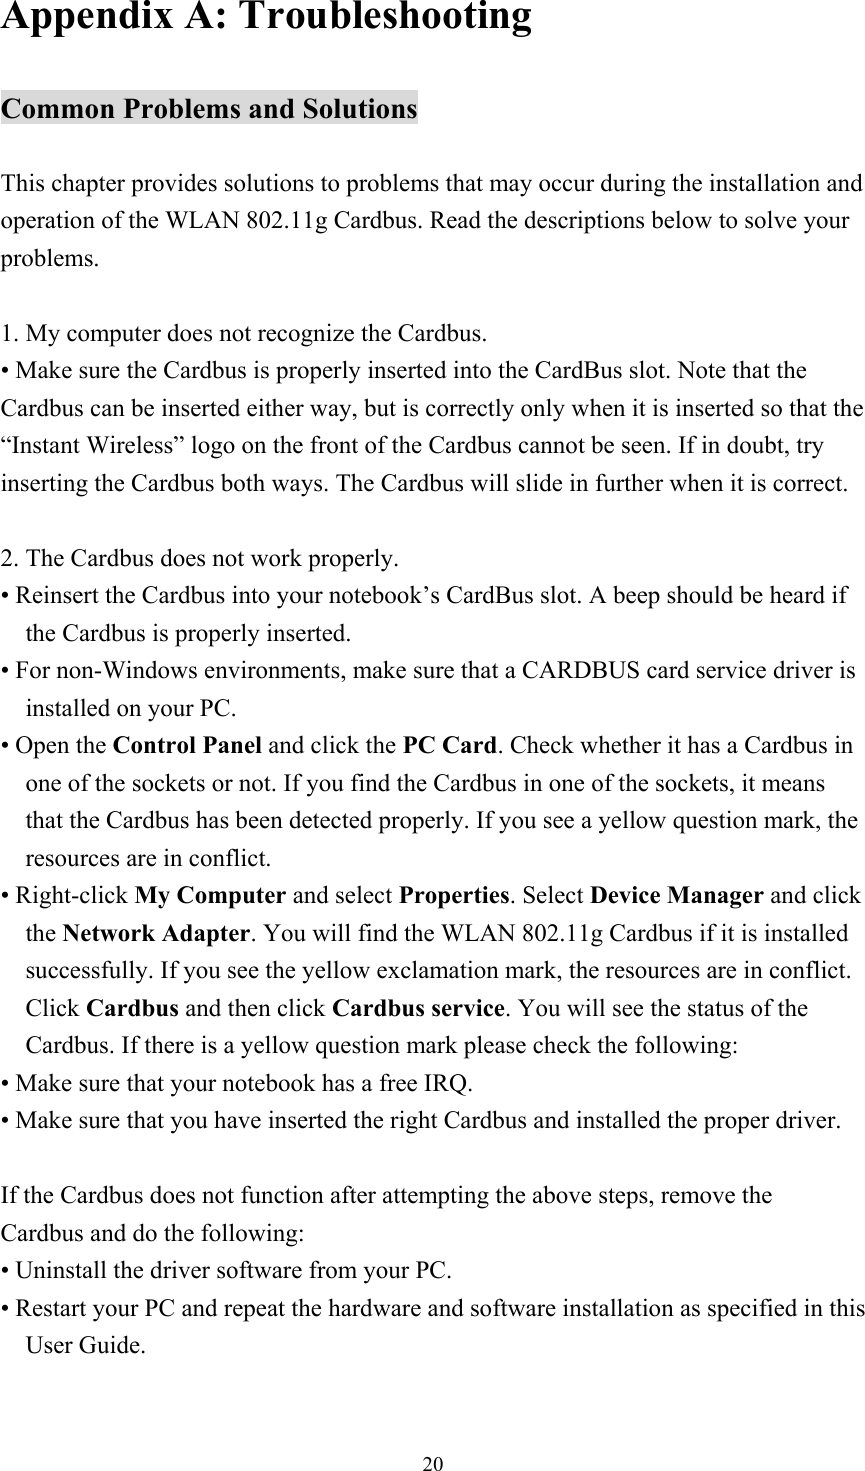  20Appendix A: Troubleshooting  Common Problems and Solutions  This chapter provides solutions to problems that may occur during the installation and operation of the WLAN 802.11g Cardbus. Read the descriptions below to solve your problems.  1. My computer does not recognize the Cardbus. • Make sure the Cardbus is properly inserted into the CardBus slot. Note that the Cardbus can be inserted either way, but is correctly only when it is inserted so that the “Instant Wireless” logo on the front of the Cardbus cannot be seen. If in doubt, try inserting the Cardbus both ways. The Cardbus will slide in further when it is correct.  2. The Cardbus does not work properly. • Reinsert the Cardbus into your notebook’s CardBus slot. A beep should be heard if the Cardbus is properly inserted. • For non-Windows environments, make sure that a CARDBUS card service driver is installed on your PC. • Open the Control Panel and click the PC Card. Check whether it has a Cardbus in one of the sockets or not. If you find the Cardbus in one of the sockets, it means that the Cardbus has been detected properly. If you see a yellow question mark, the resources are in conflict. • Right-click My Computer and select Properties. Select Device Manager and click the Network Adapter. You will find the WLAN 802.11g Cardbus if it is installed successfully. If you see the yellow exclamation mark, the resources are in conflict. Click Cardbus and then click Cardbus service. You will see the status of the Cardbus. If there is a yellow question mark please check the following: • Make sure that your notebook has a free IRQ. • Make sure that you have inserted the right Cardbus and installed the proper driver.  If the Cardbus does not function after attempting the above steps, remove the Cardbus and do the following: • Uninstall the driver software from your PC. • Restart your PC and repeat the hardware and software installation as specified in this User Guide. 